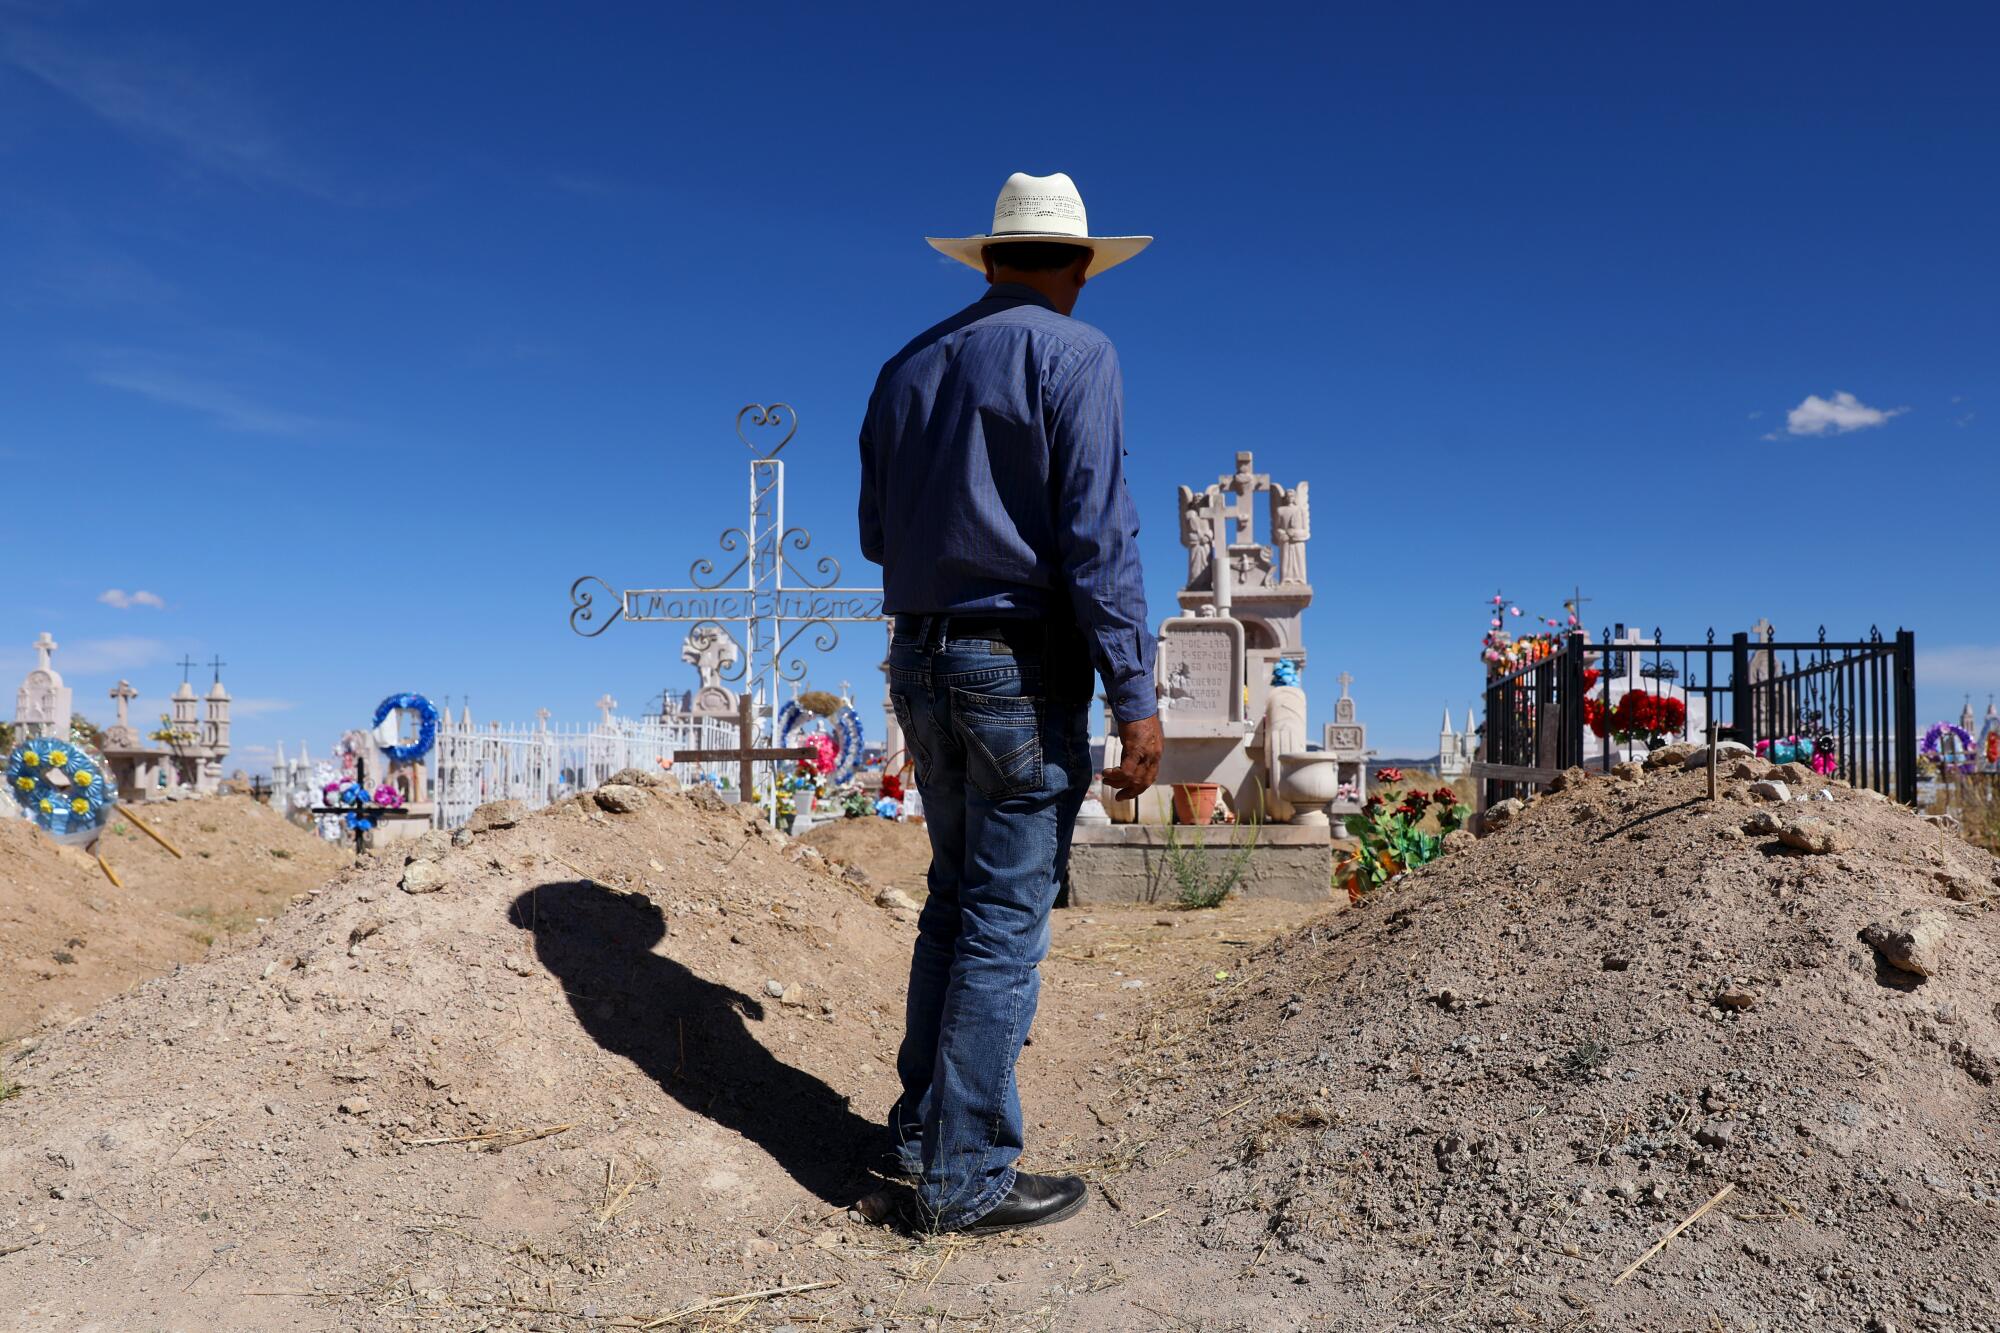 A man in a cowboy hat stands between two mounded graves in a dusty cemetery.